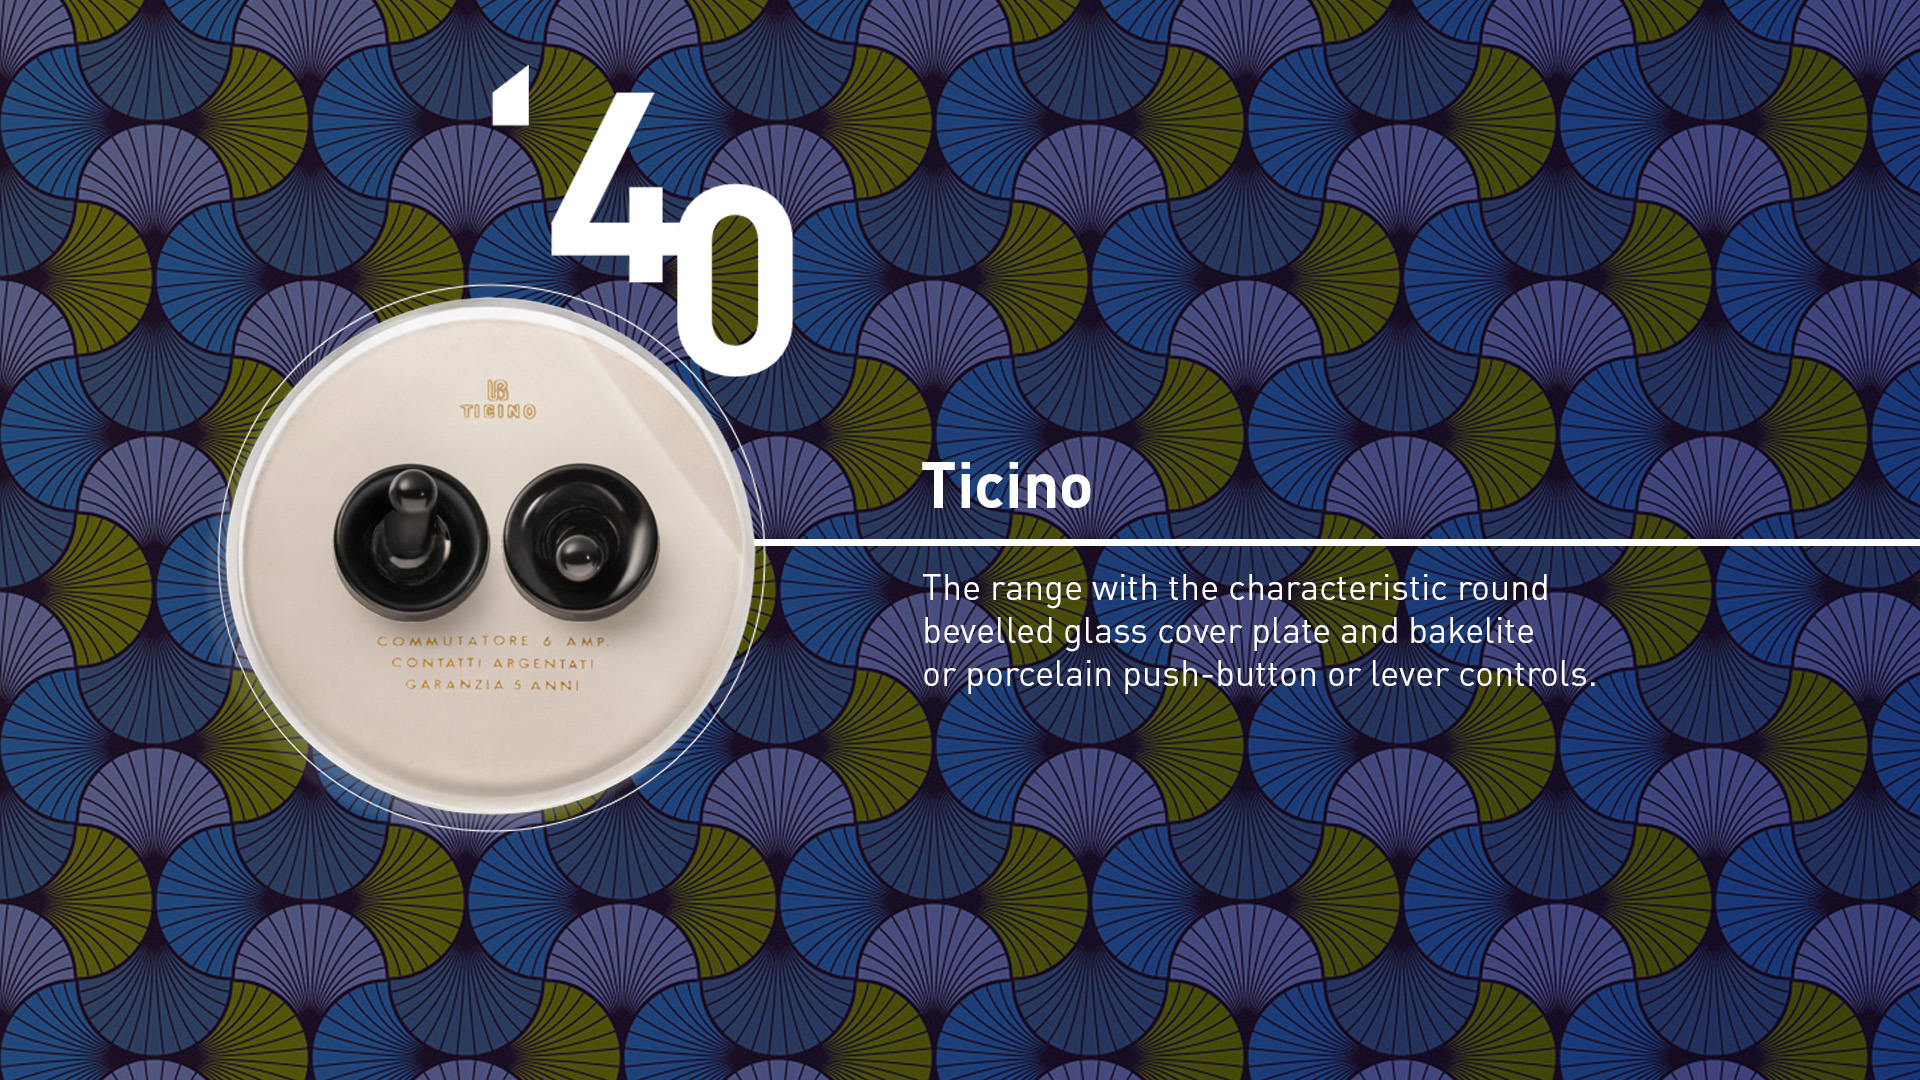 Ticino (1940). The range with the characteristic round bevelled glass cover plate and bakelite or porcelain push-button or lever controls.